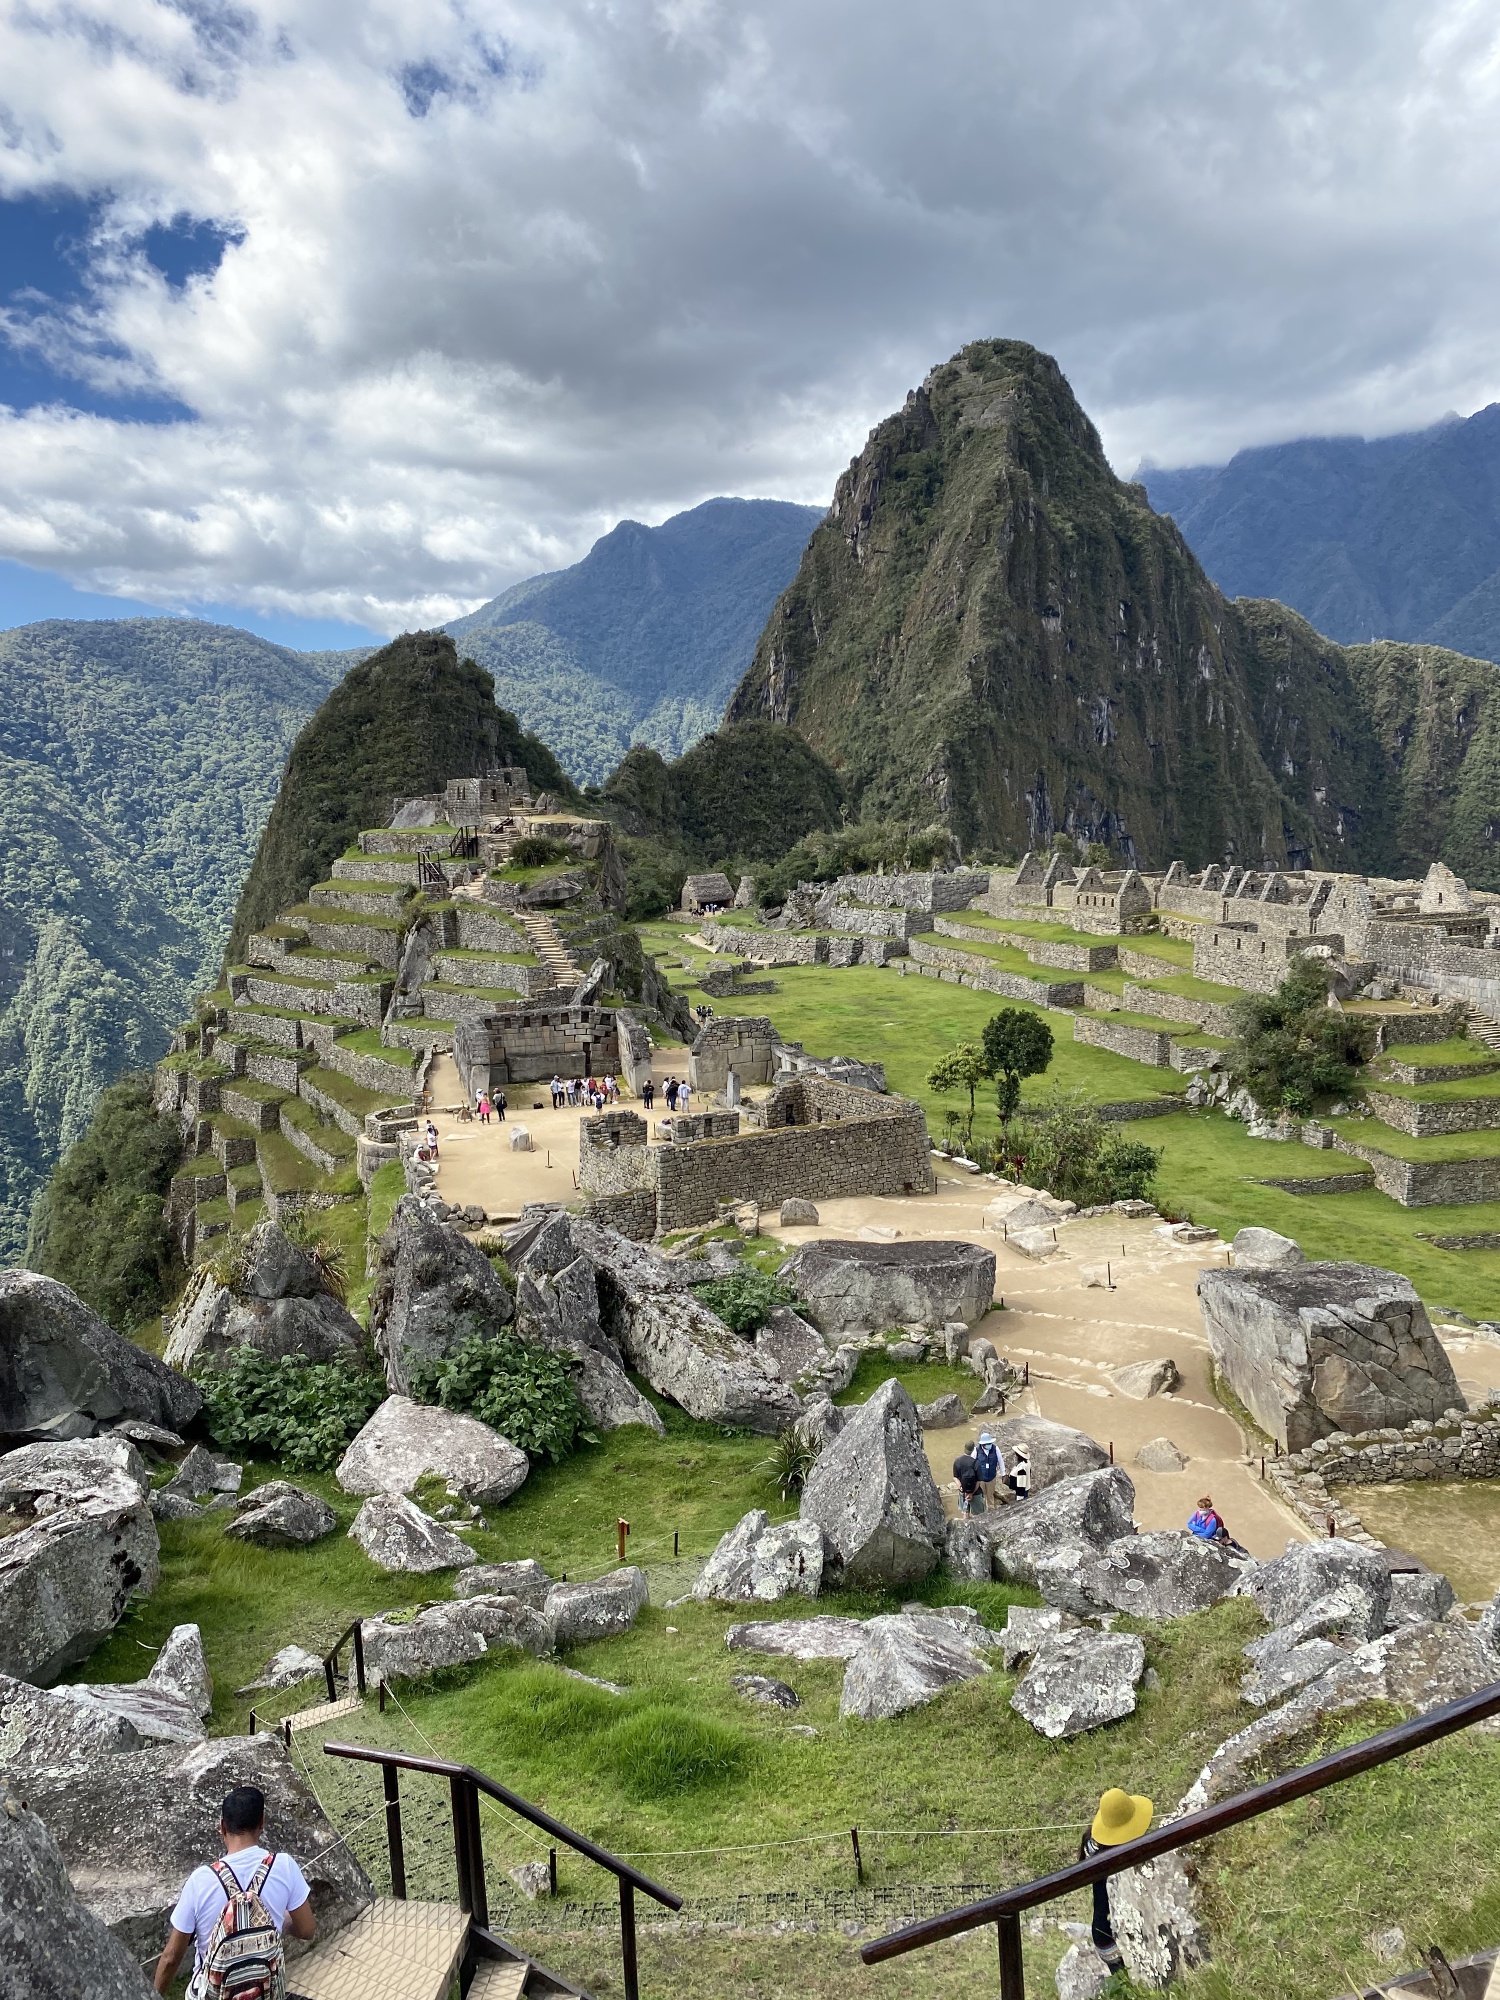 Another view of the other side of Machu Picchu